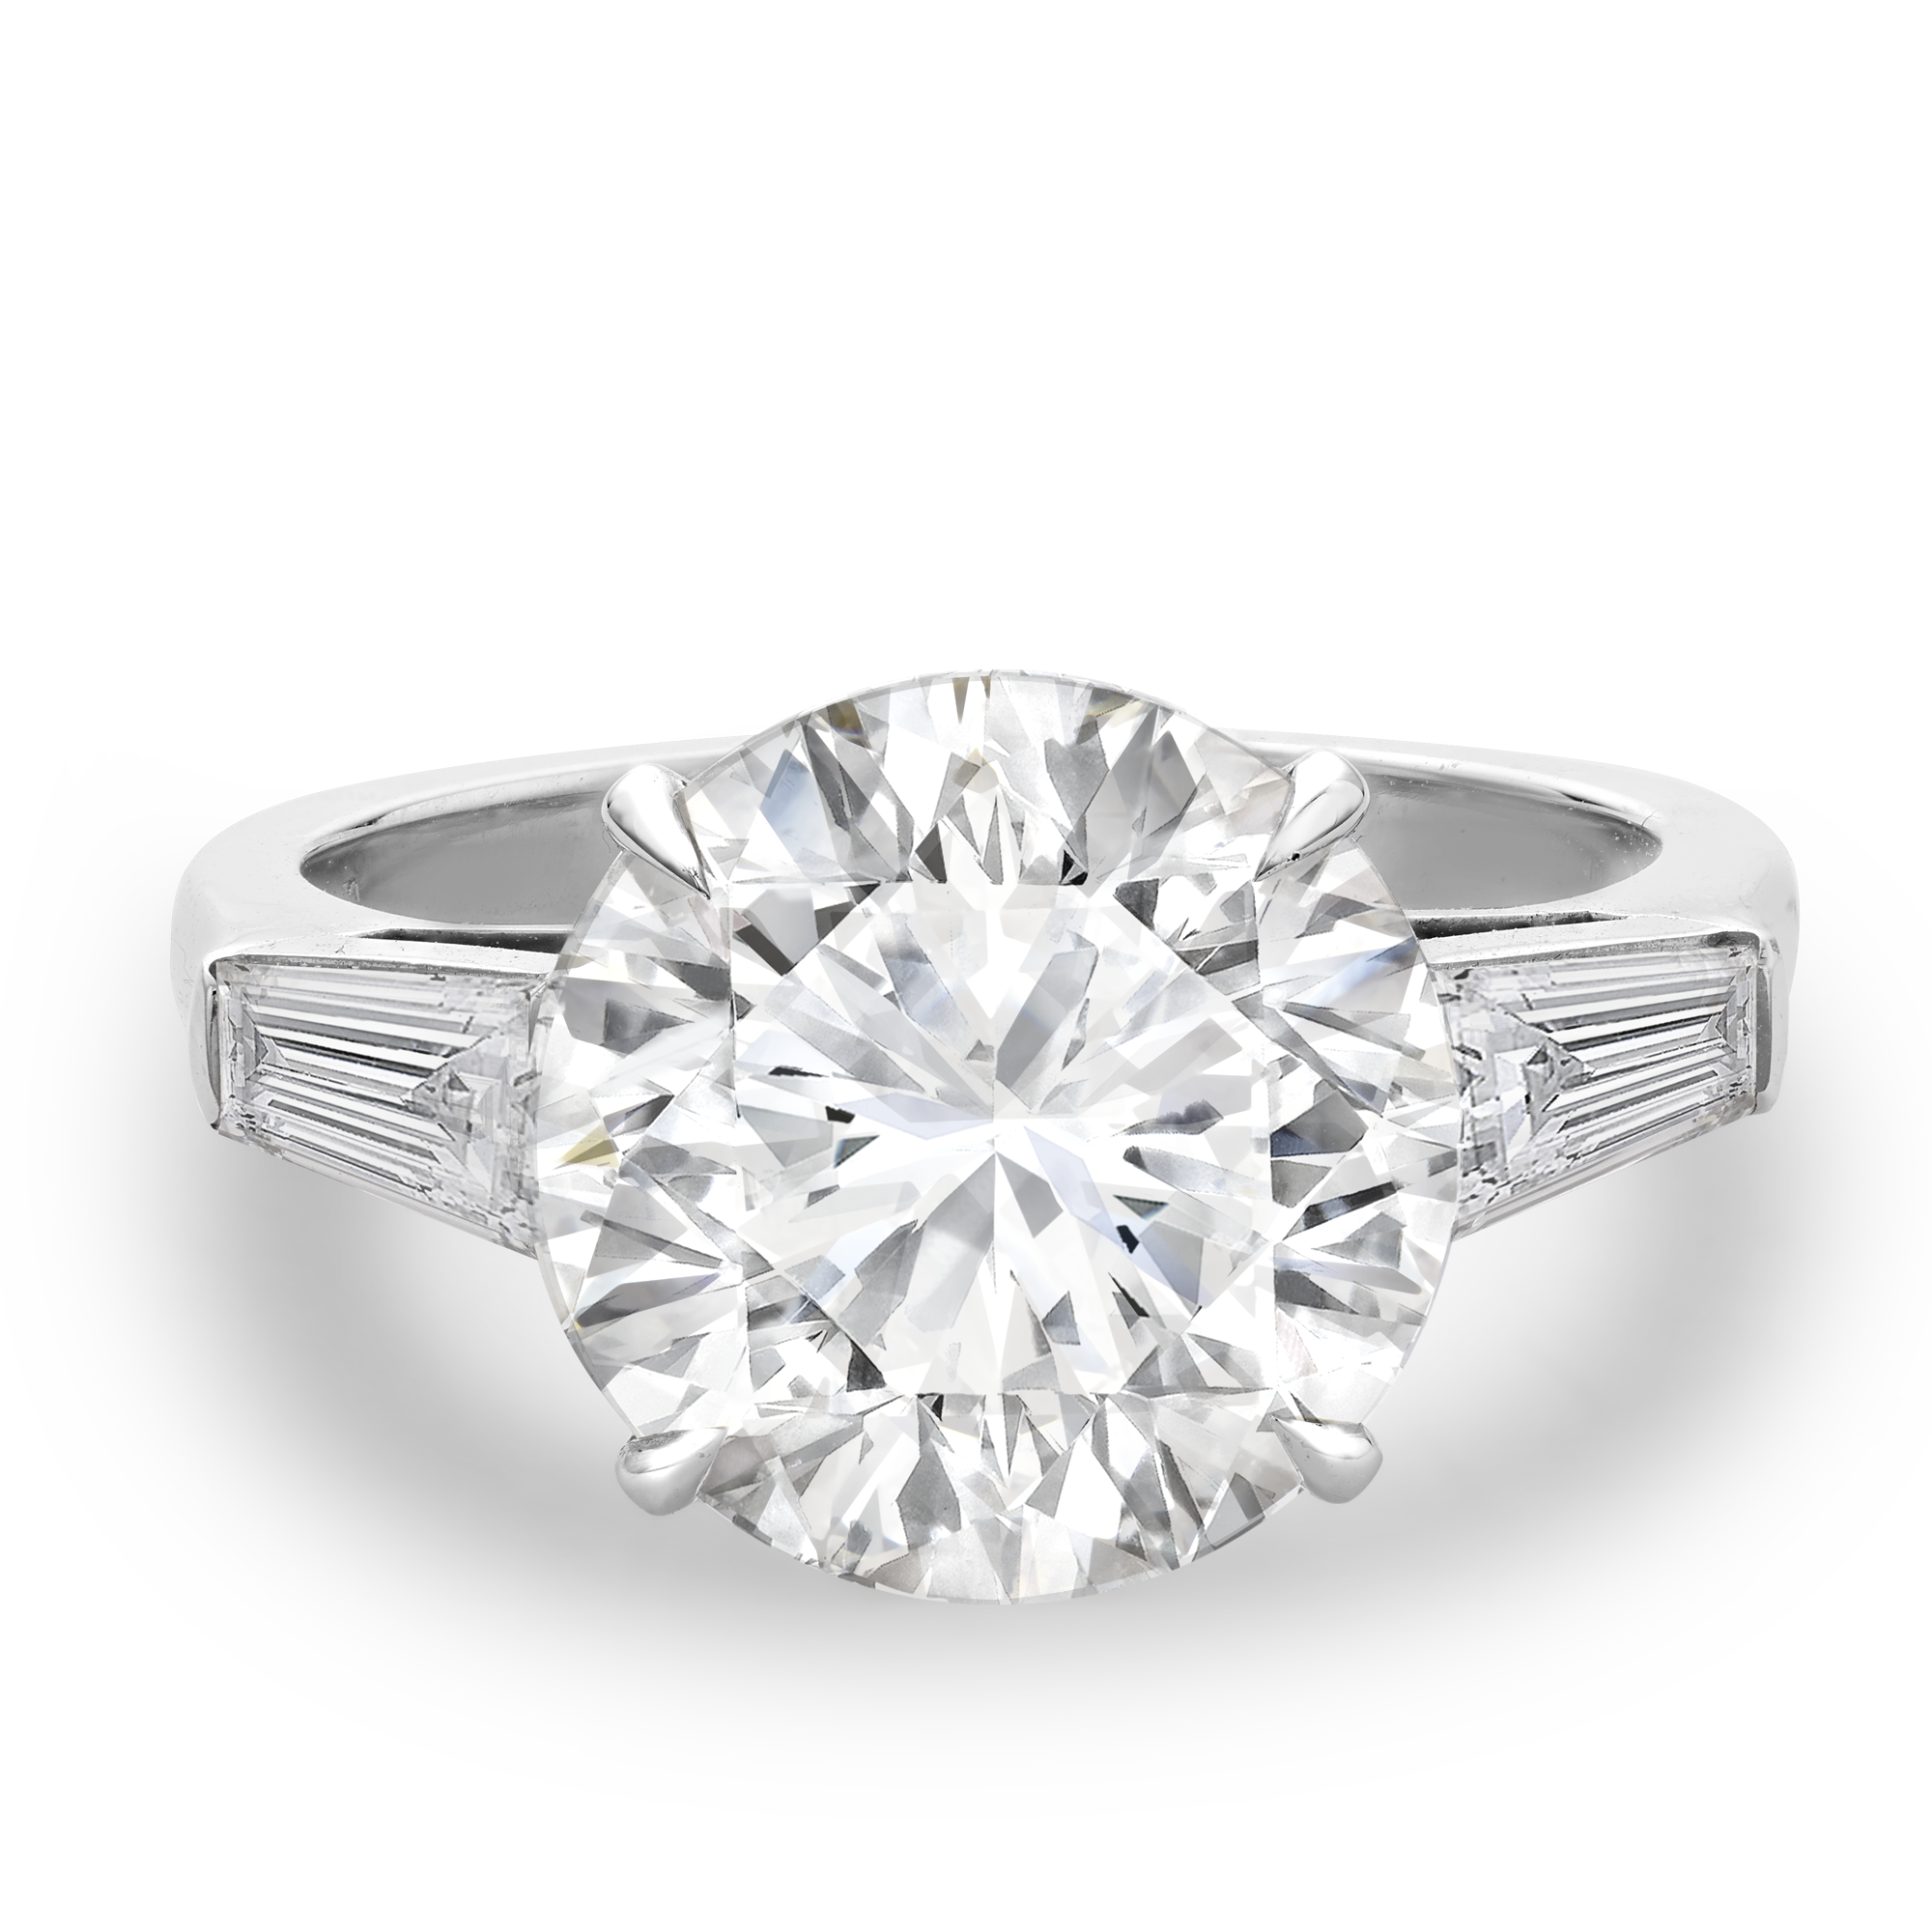 Regency 5.08ct Diamond Solitaire Ring Brilliant & Tapered Baguette Cut, Claw & Channel Set_2